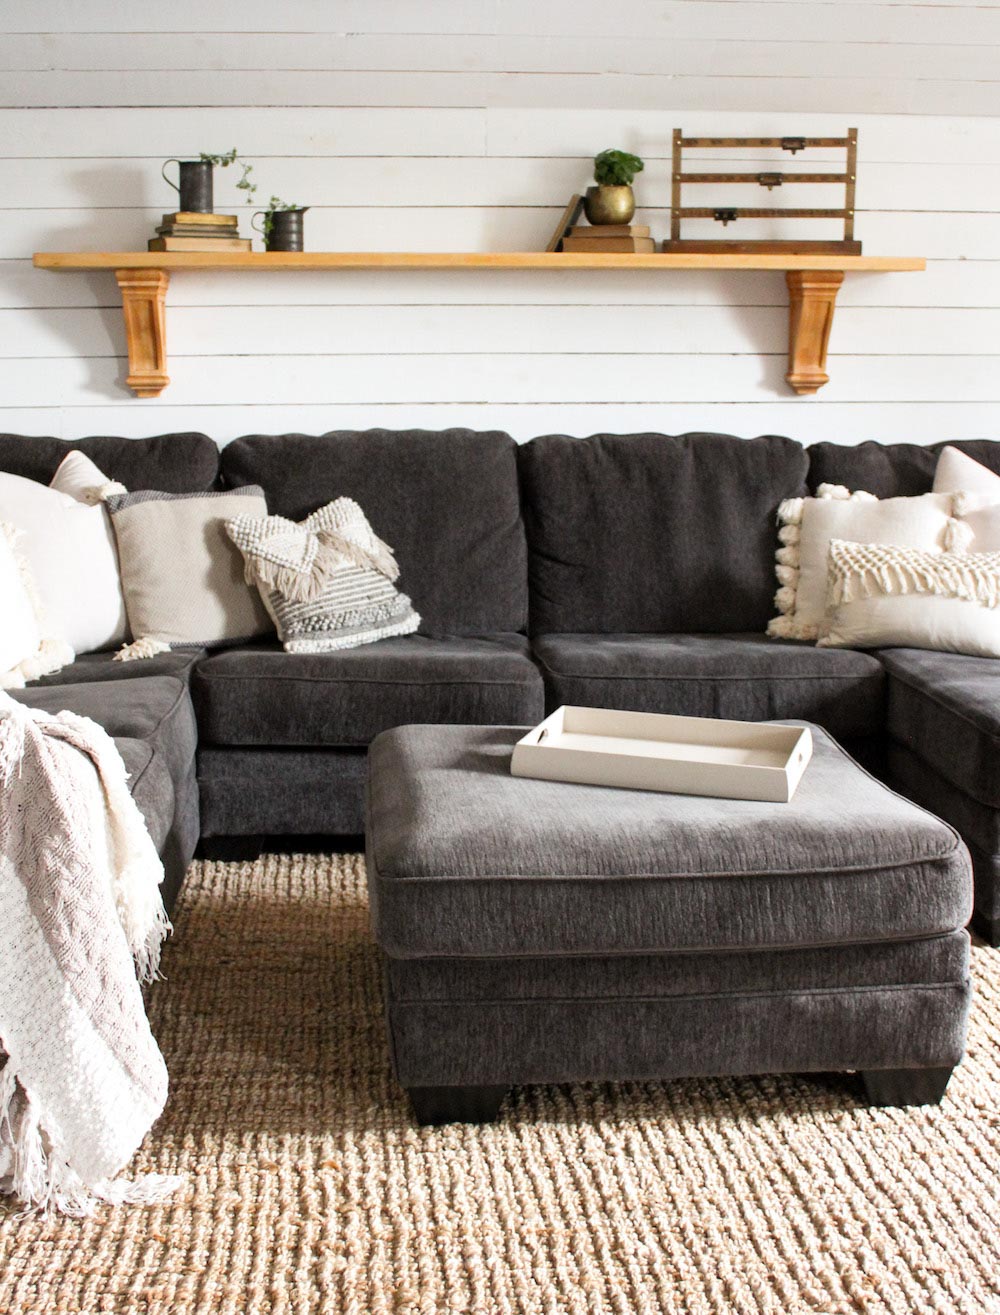 A gray sectional sits in front of a white shiplap wall with a wood shelf.